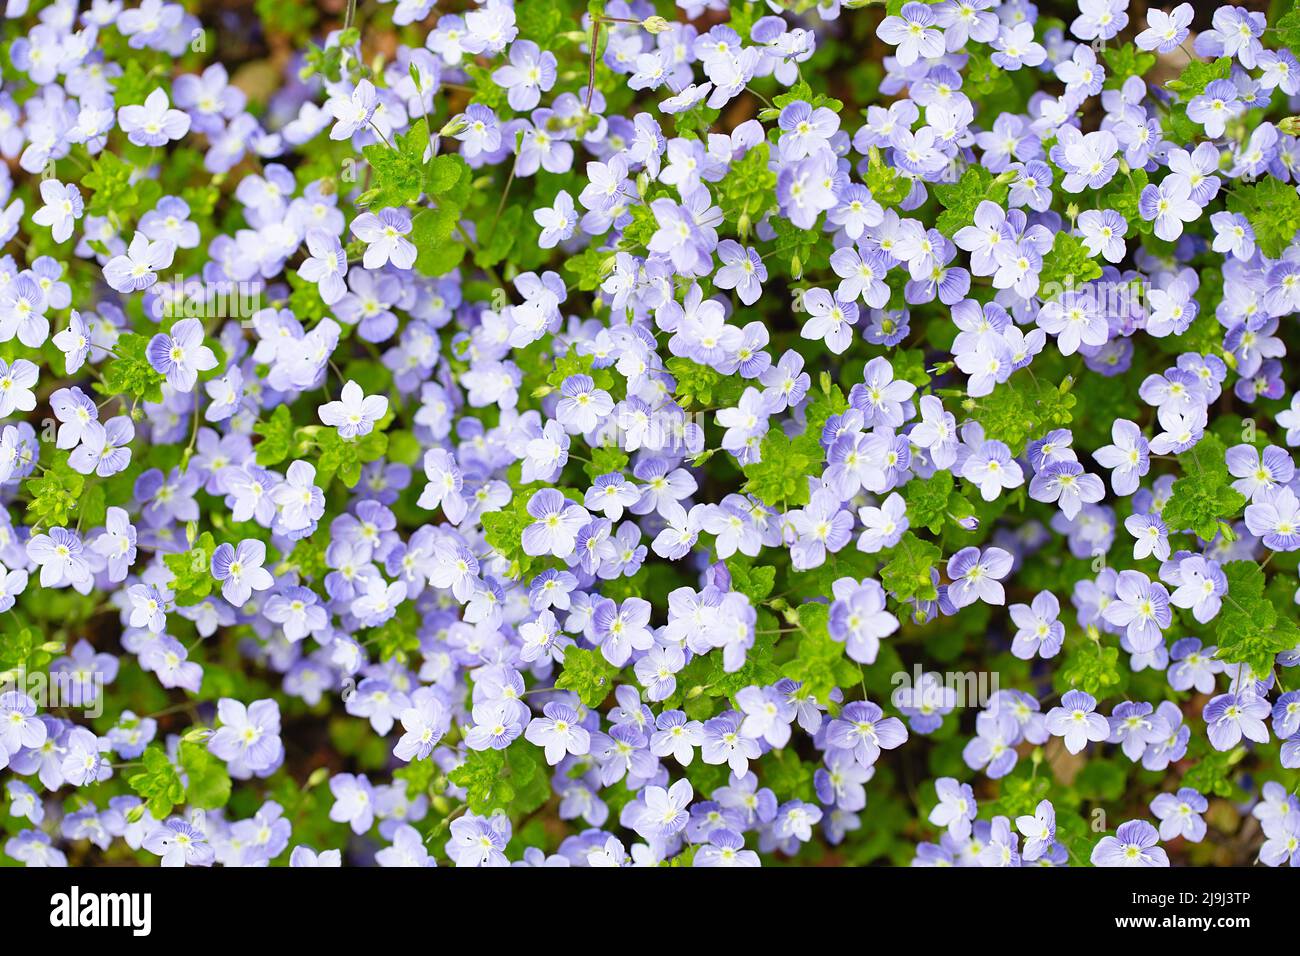 Small purple flowers with green leaves. internet springtime banner. Spring floral background. Stock Photo